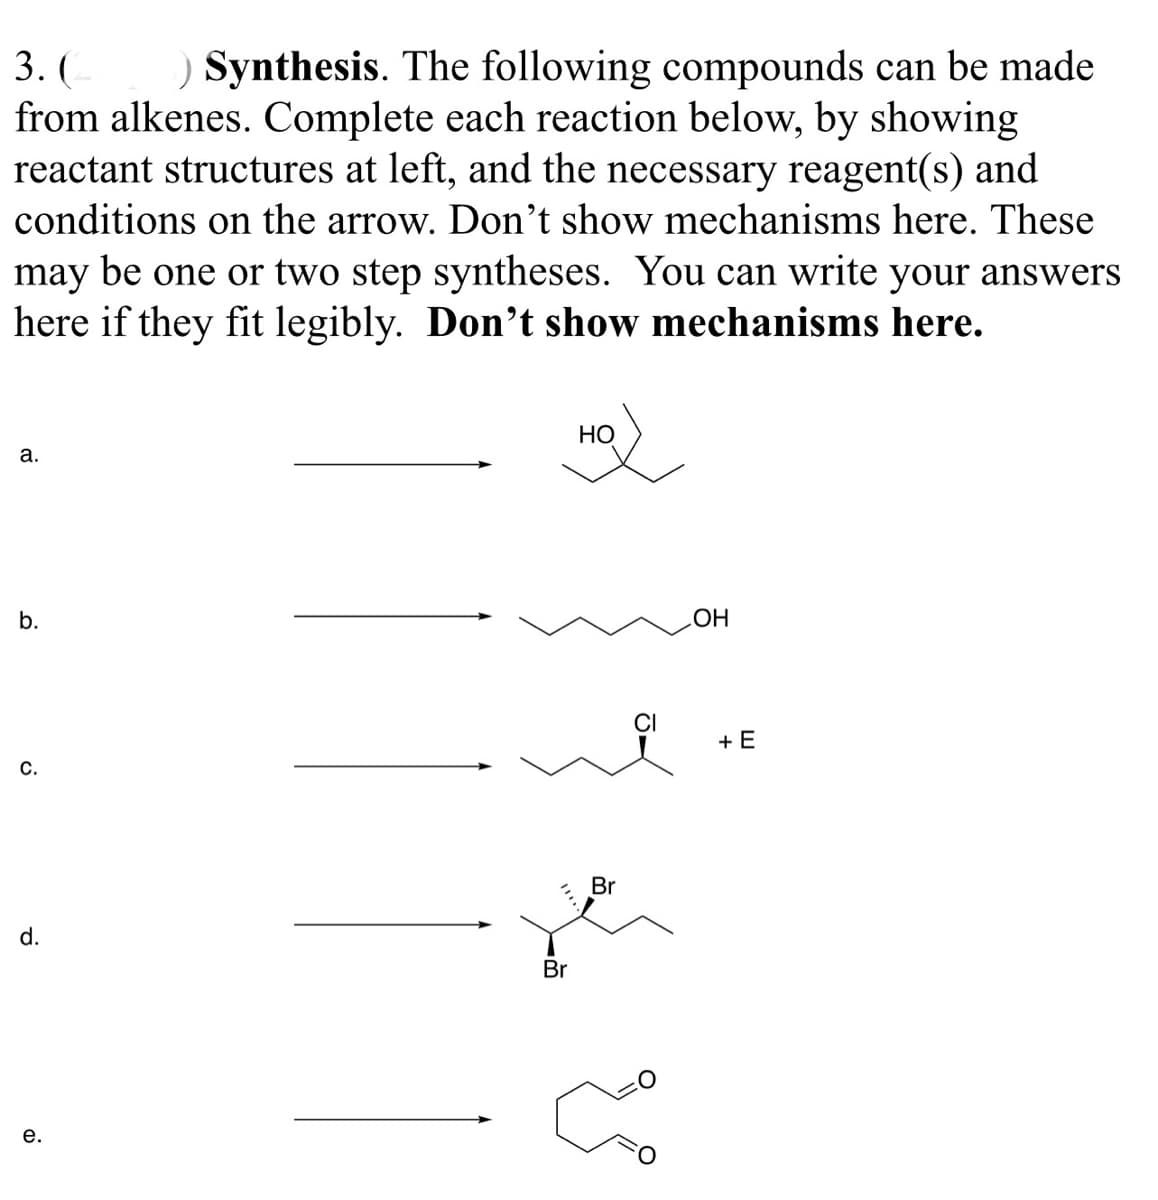 ) Synthesis. The following compounds can be made
from alkenes. Complete each reaction below, by showing
reactant structures at left, and the necessary reagent(s) and
conditions on the arrow. Don't show mechanisms here. These
may be one or two step syntheses. You can write your answers
here if they fit legibly. Don't show mechanisms here.
3. (
НО
а.
b.
HO
CI
+ E
С.
Br
d.
Br
е.
